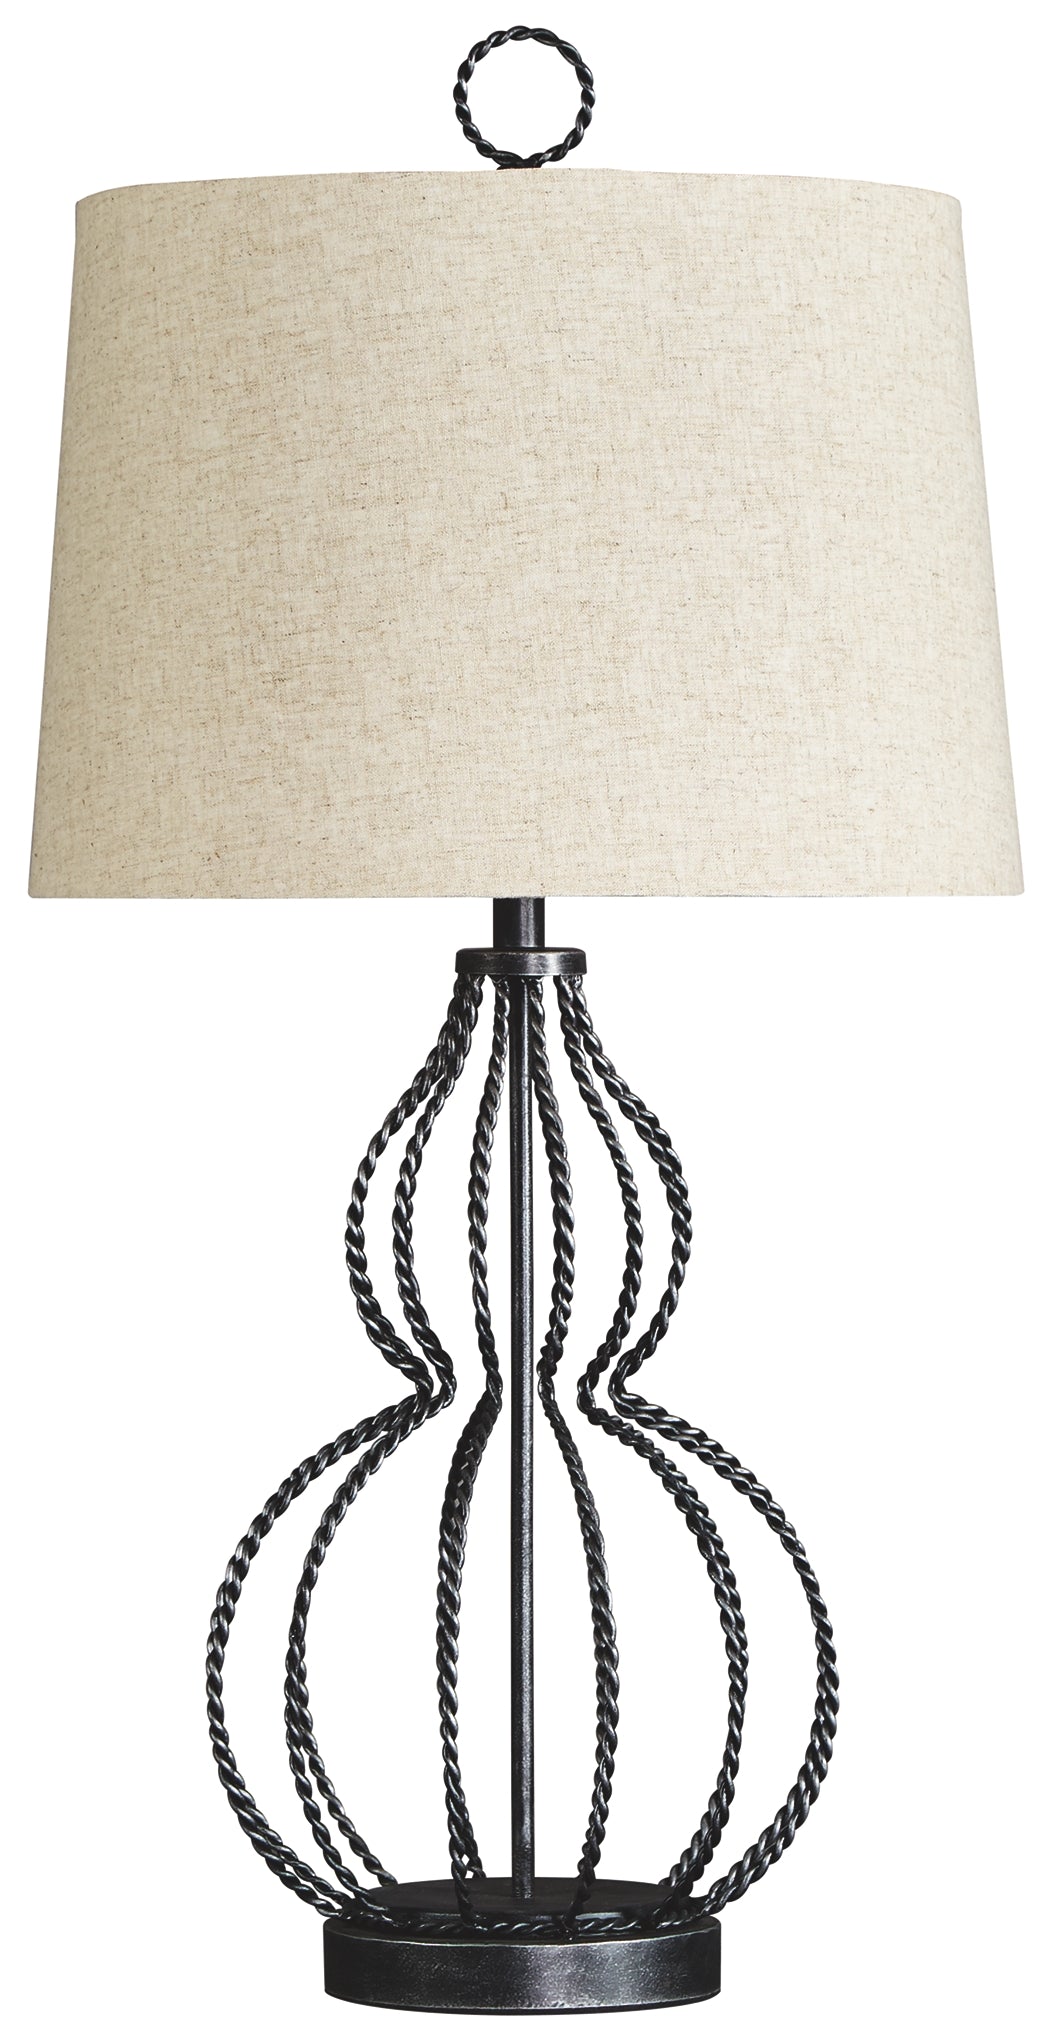 Linora Signature Design by Ashley Table Lamp